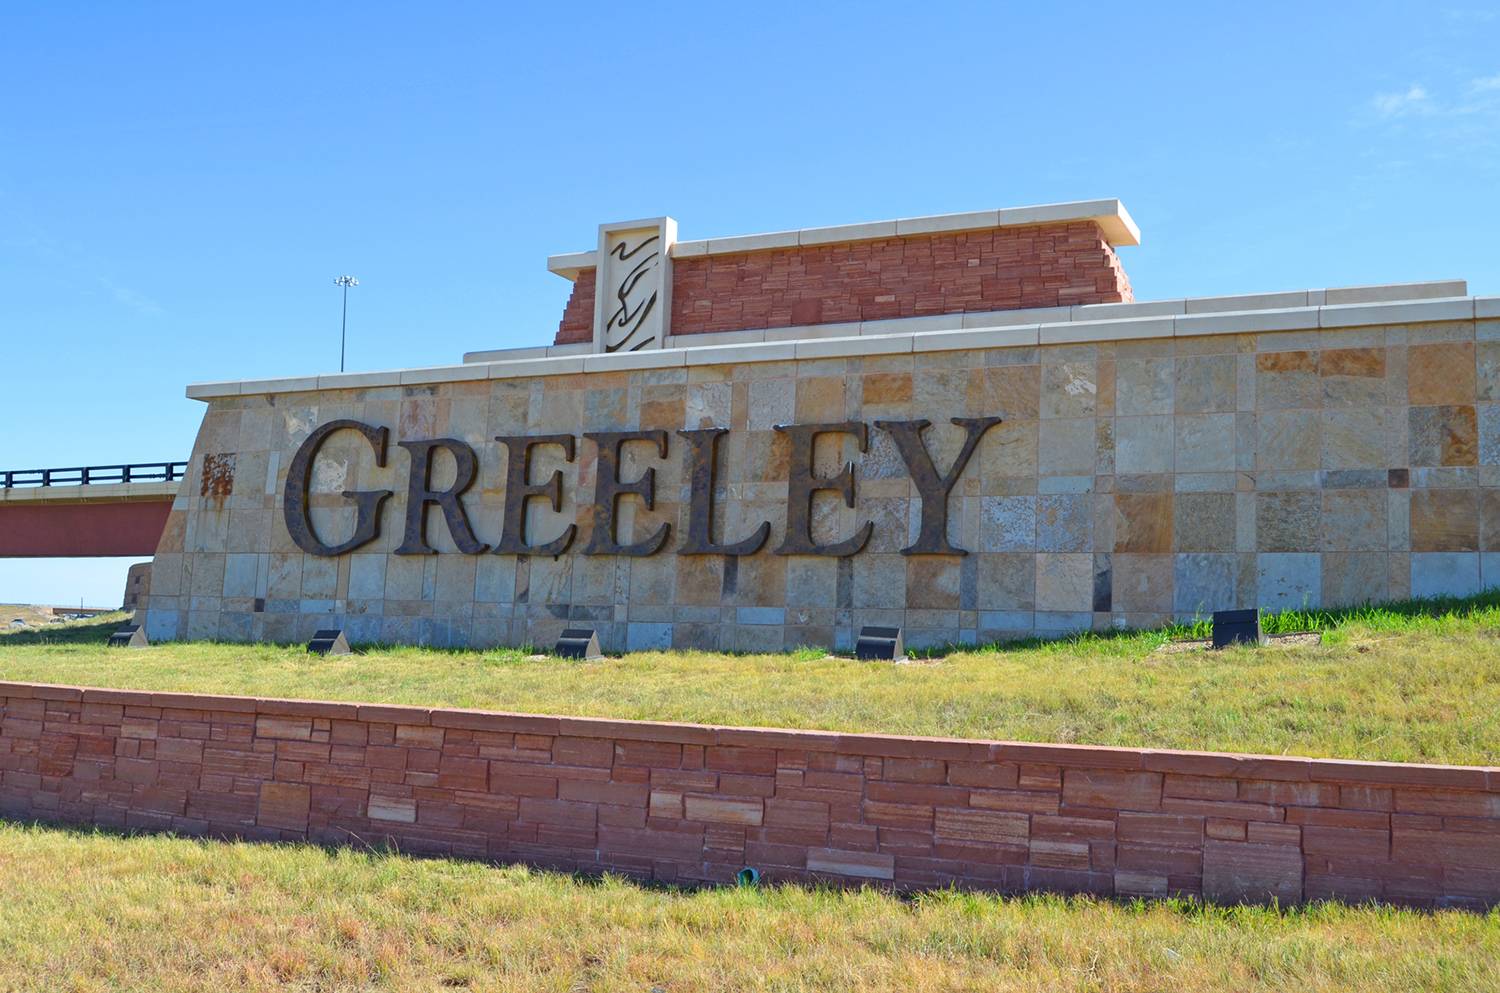 Search new construction or find new homes and communities for sale in Greeley, Colorado